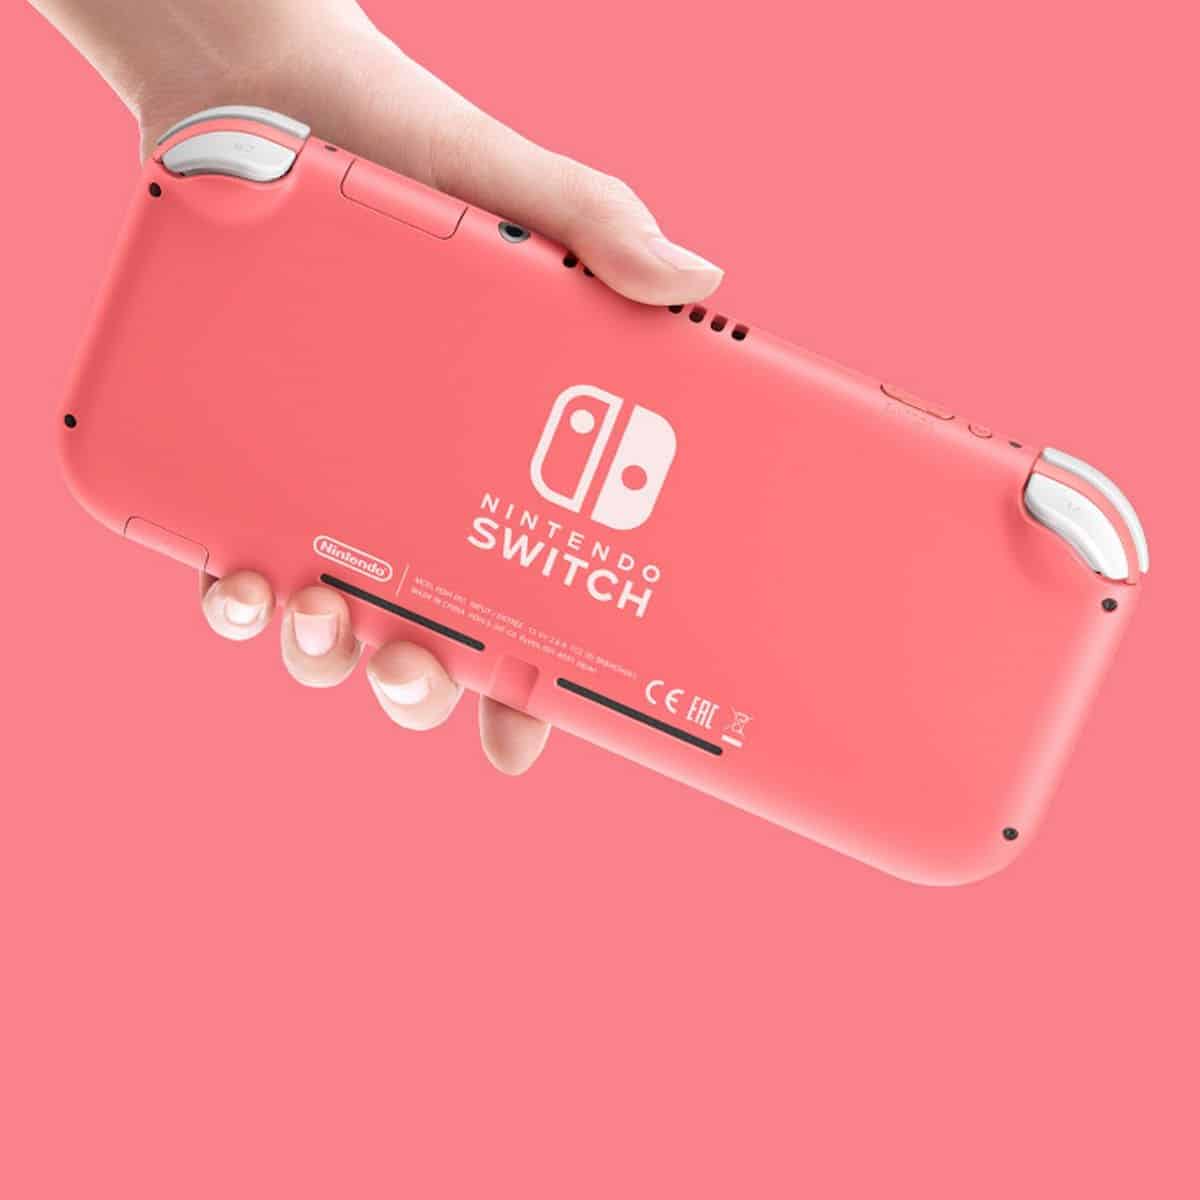 Soundboard: Buttons with Instant Sounds for Nintendo Switch - Nintendo  Official Site